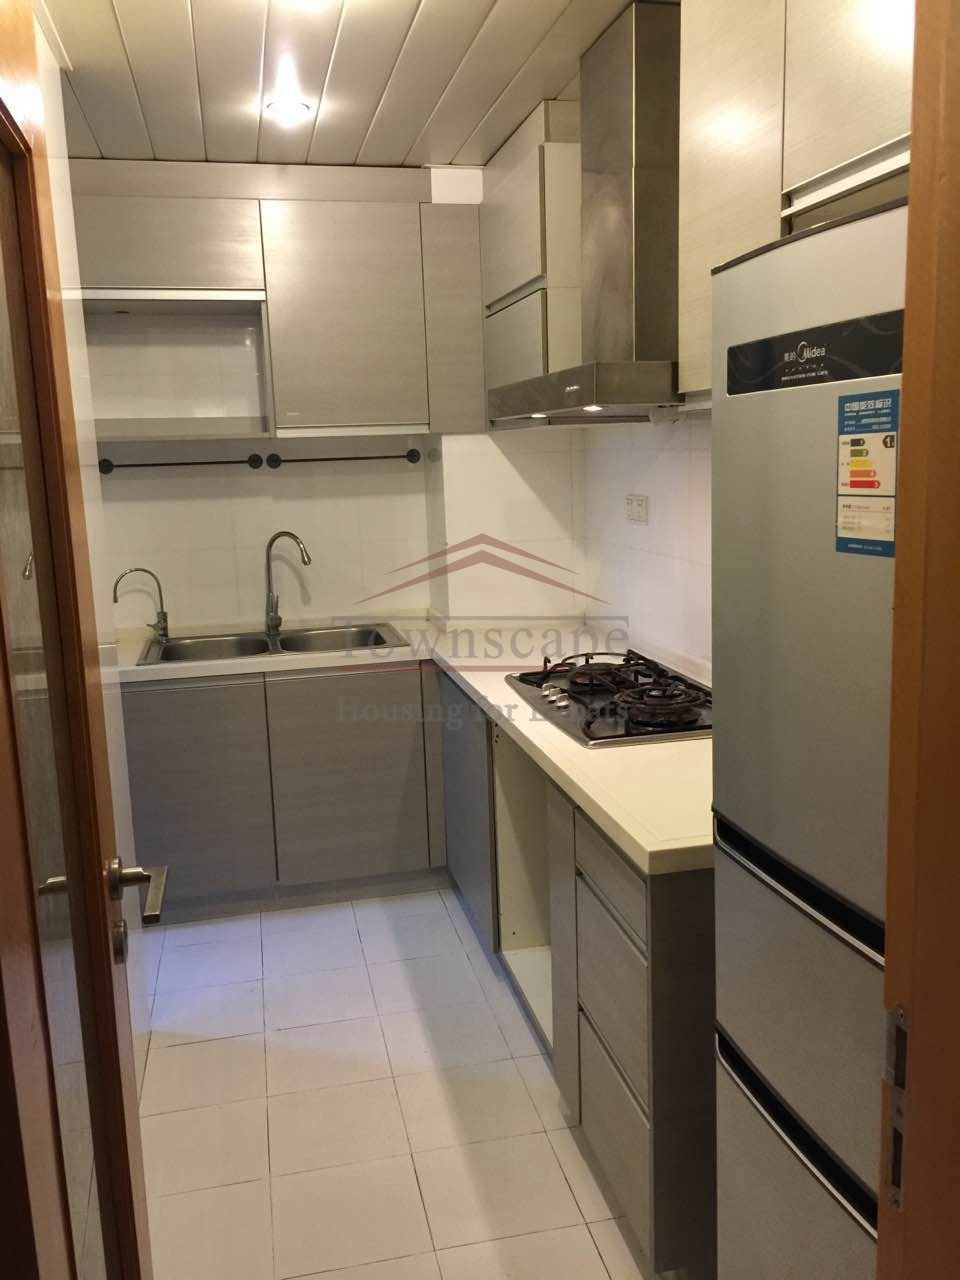 Rent apartment in Shanghai french concession Fantastic 2 BR apartment in former colonial area line 2/7